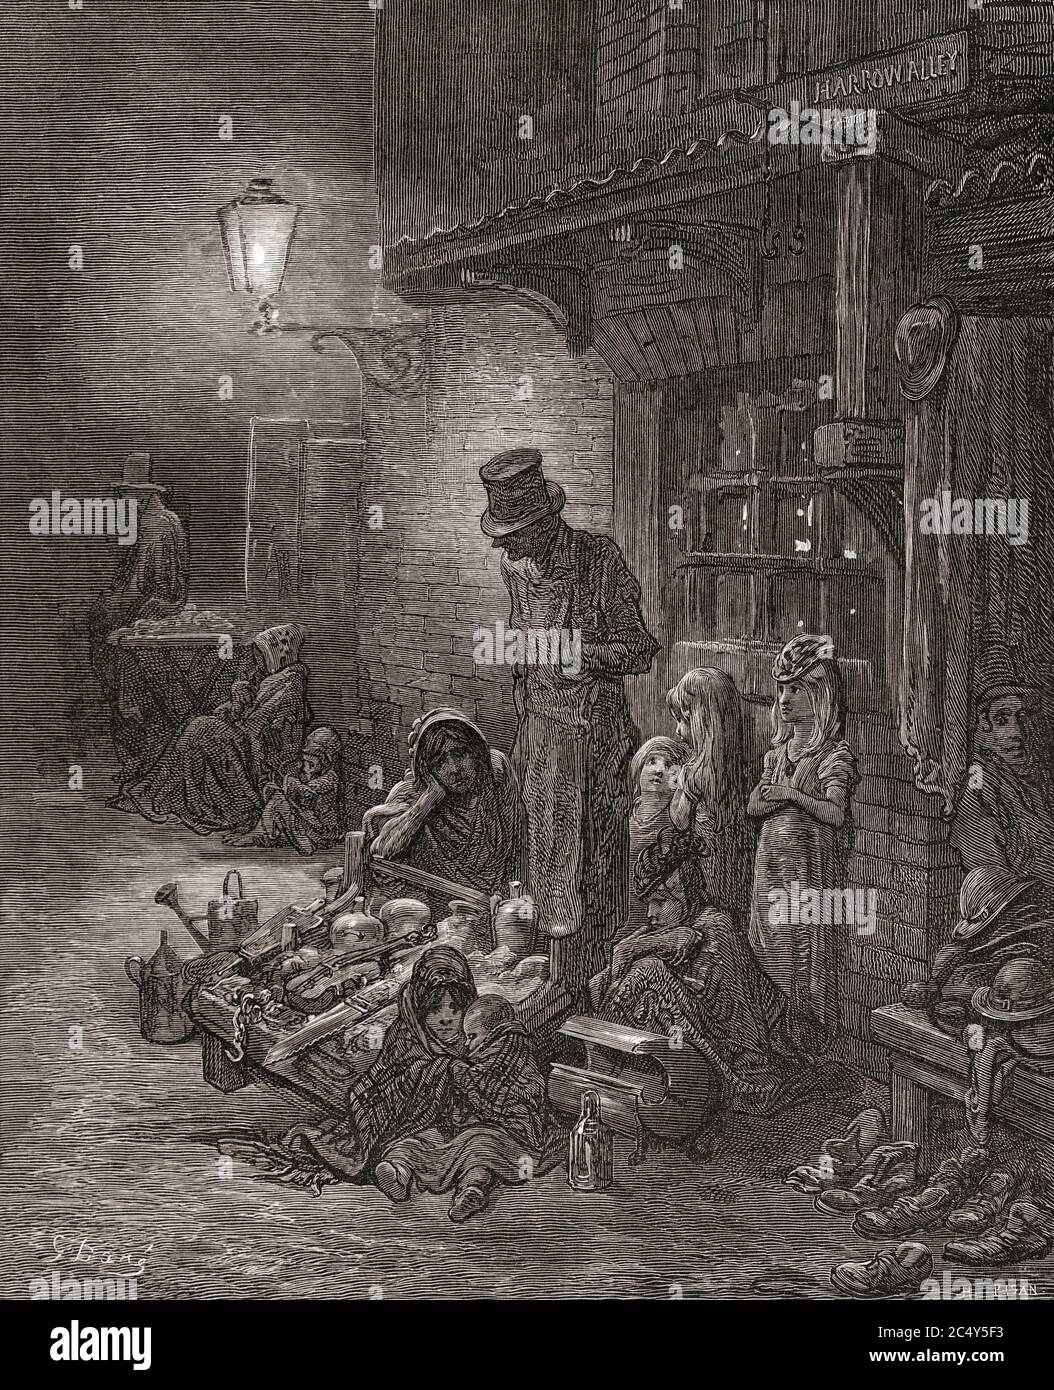 Poverty stricken citizens of Houndsditch, East End, London.  After an engraving by Gustave Dore in the book London: A Pilgrimage by Gustave Dore and Blanchard Jerrold, published 1872. Stock Photo